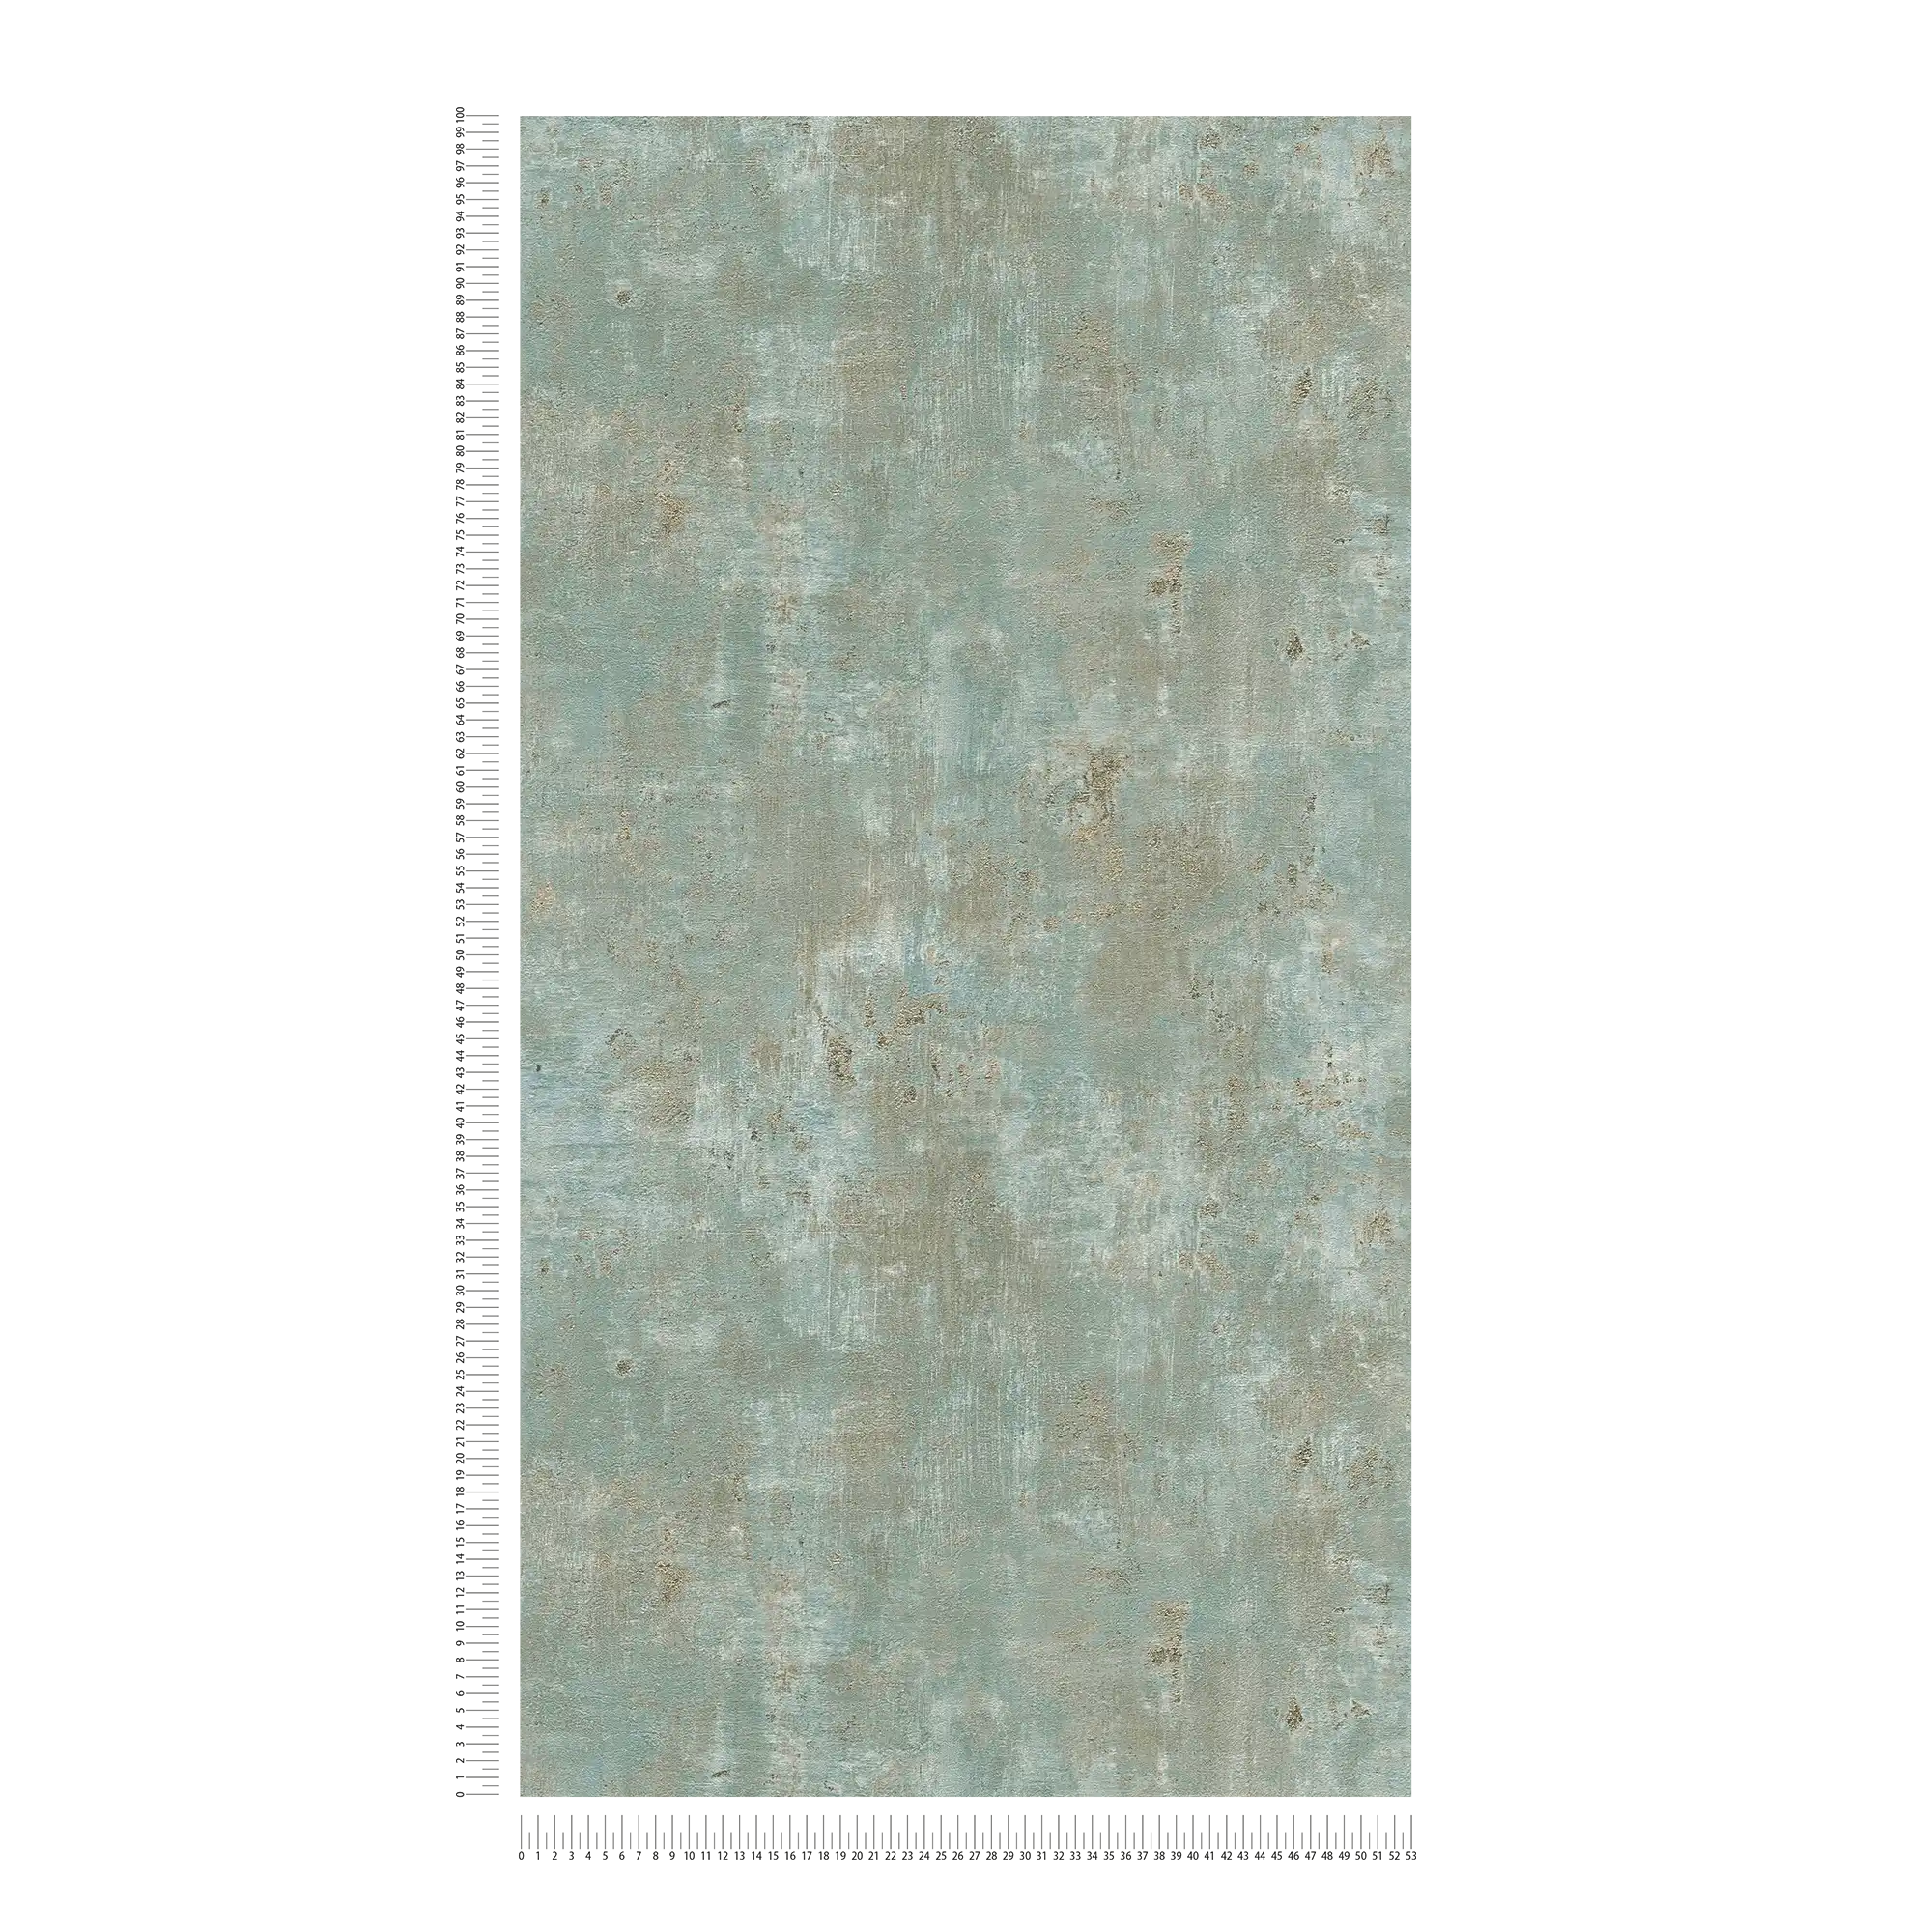             Non-woven wallpaper in rust look with accents - green, blue, gold
        